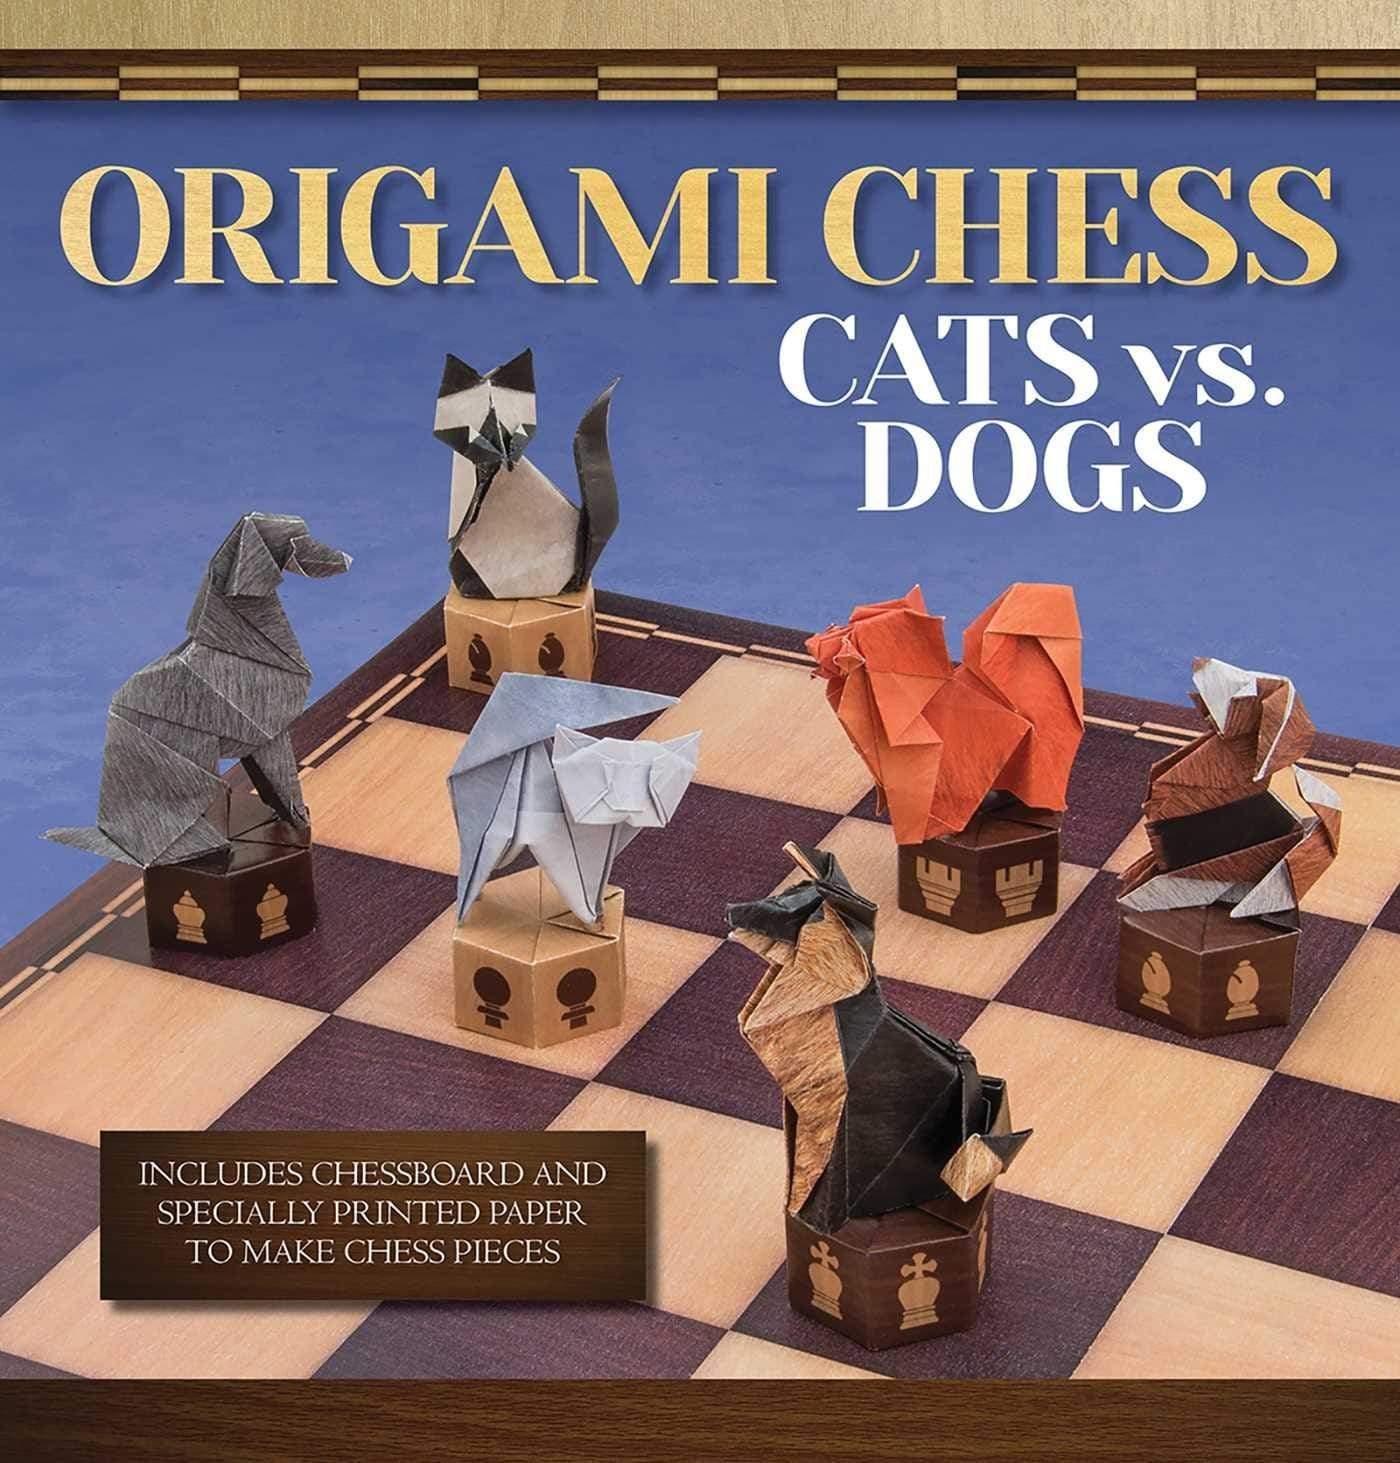 Origami Chess: Cats vs. Dogs